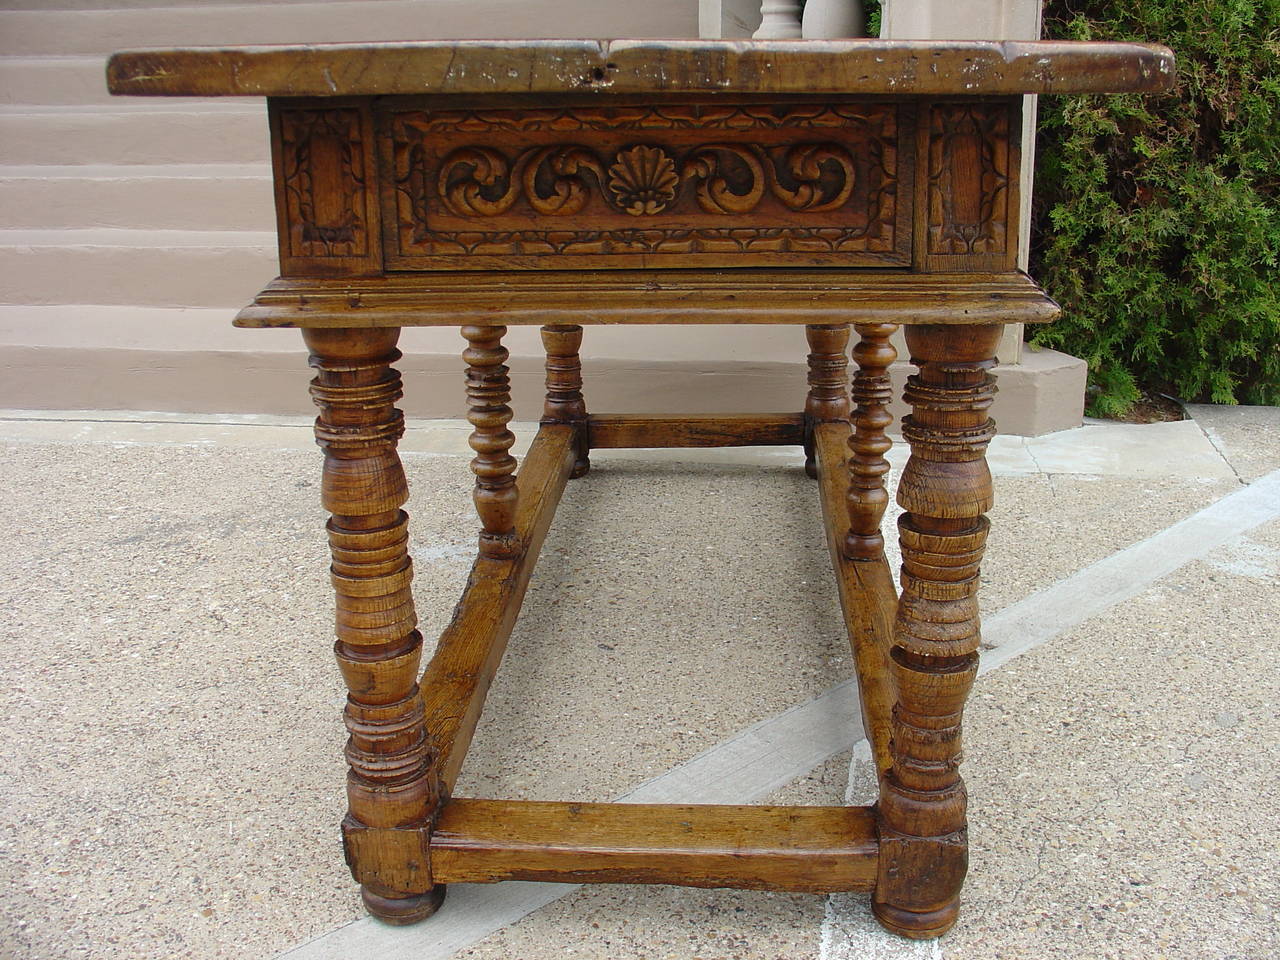 Antique Spanish Walnut Wood Table from the 1600’s 4